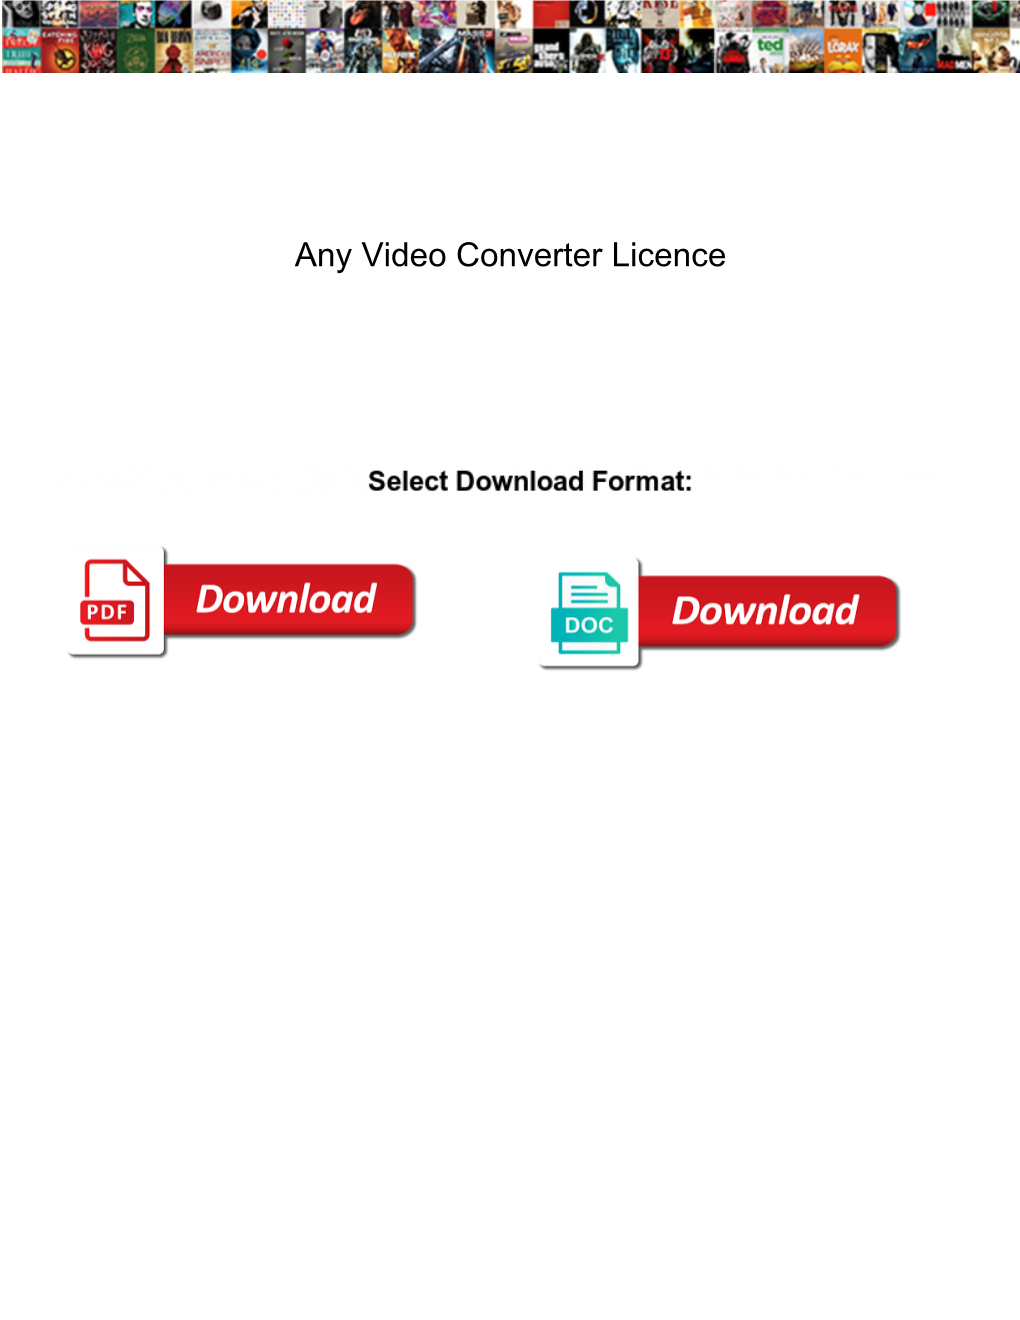 Any Video Converter Licence